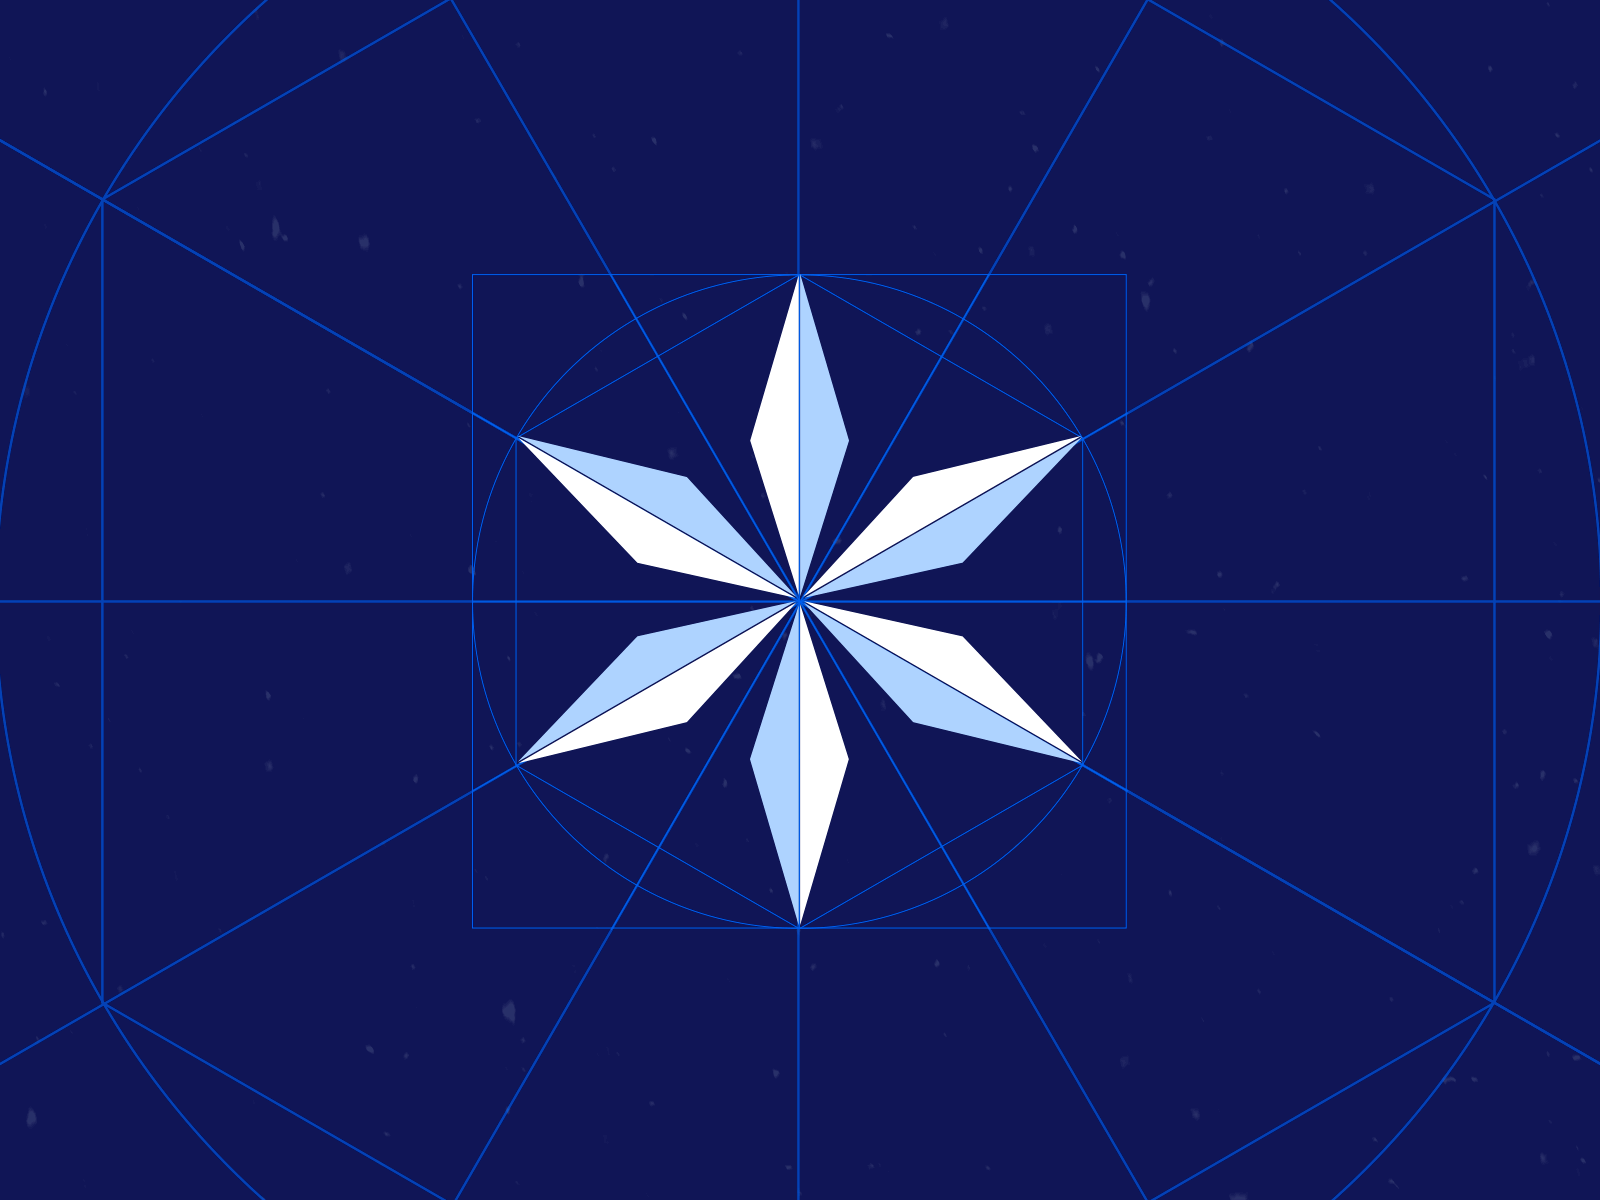 The axial rotation of a lonely snowflake